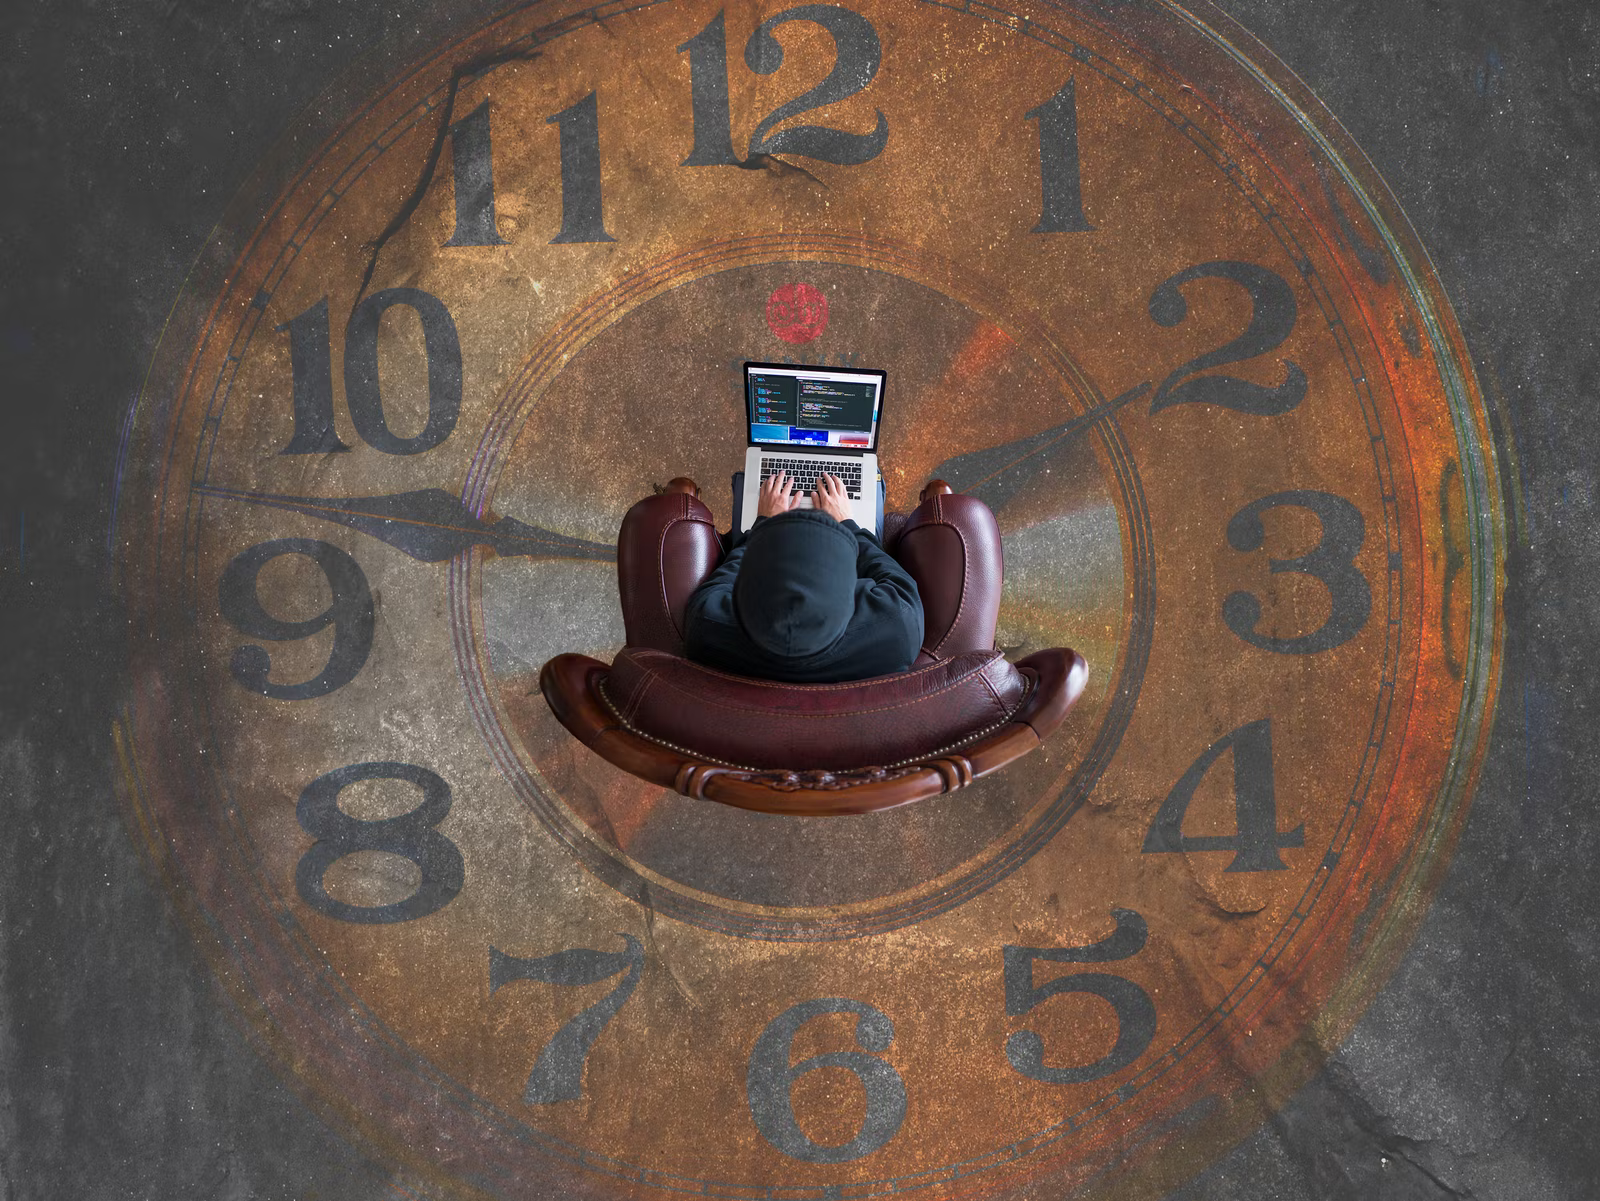 A seated figure works around the clock representing the risk of work stress